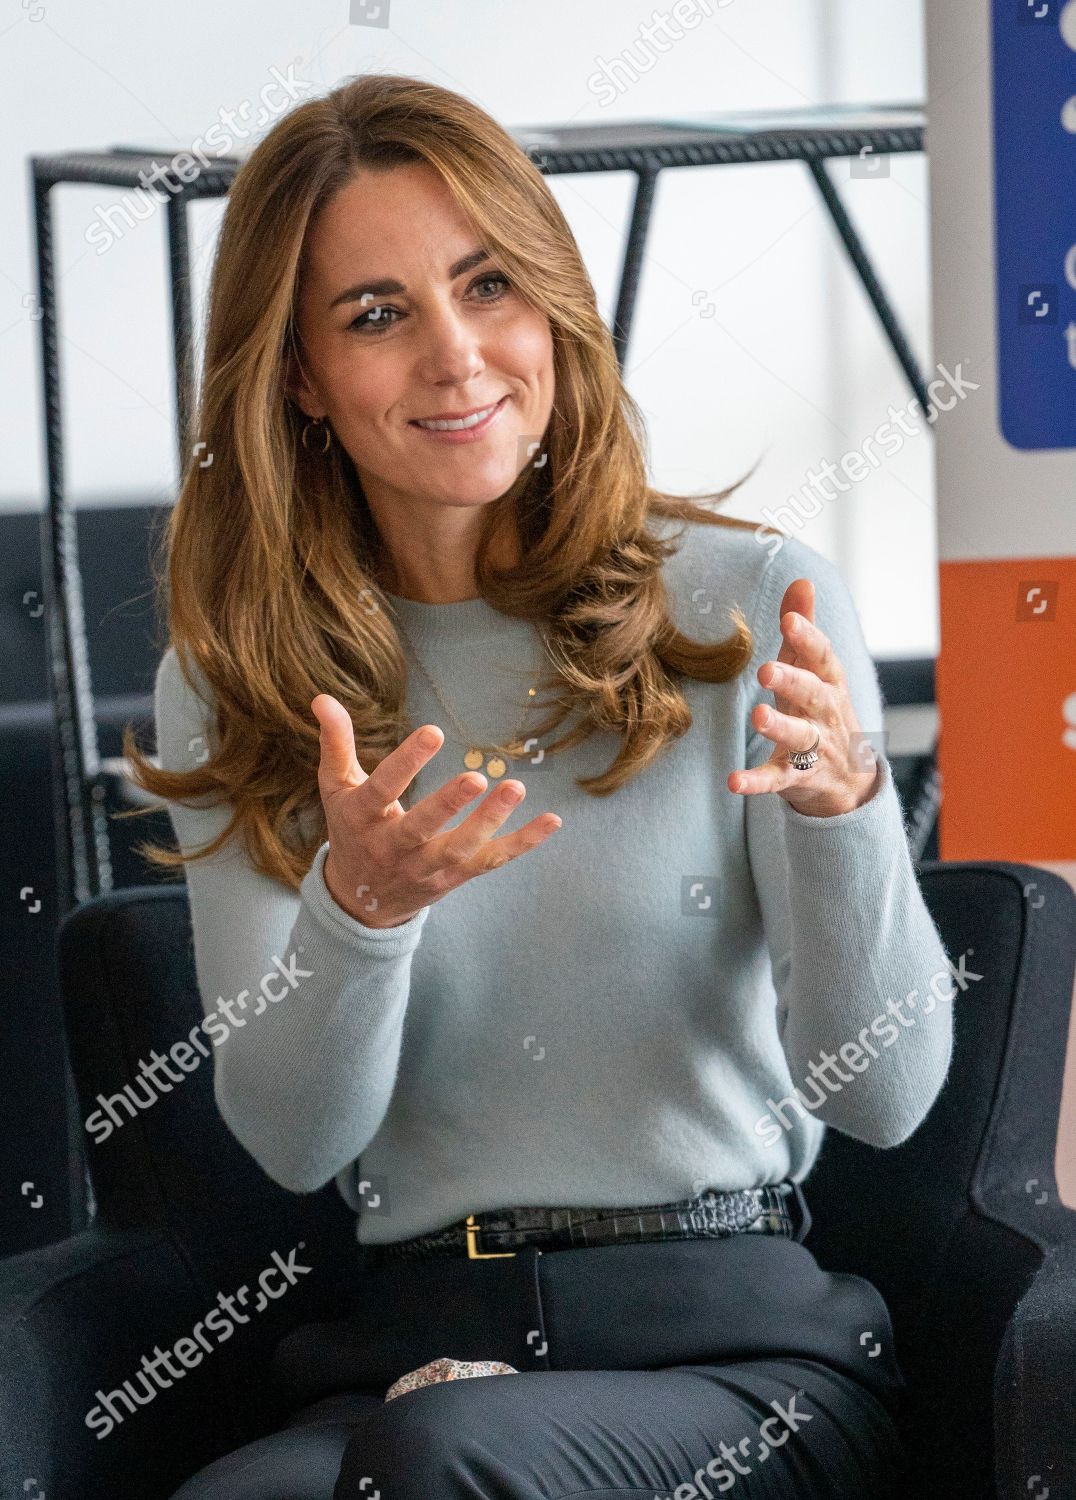 the-duchess-of-cambridge-visits-students-at-the-university-of-derby-uk-shutterstock-editorial-10931996e.jpg